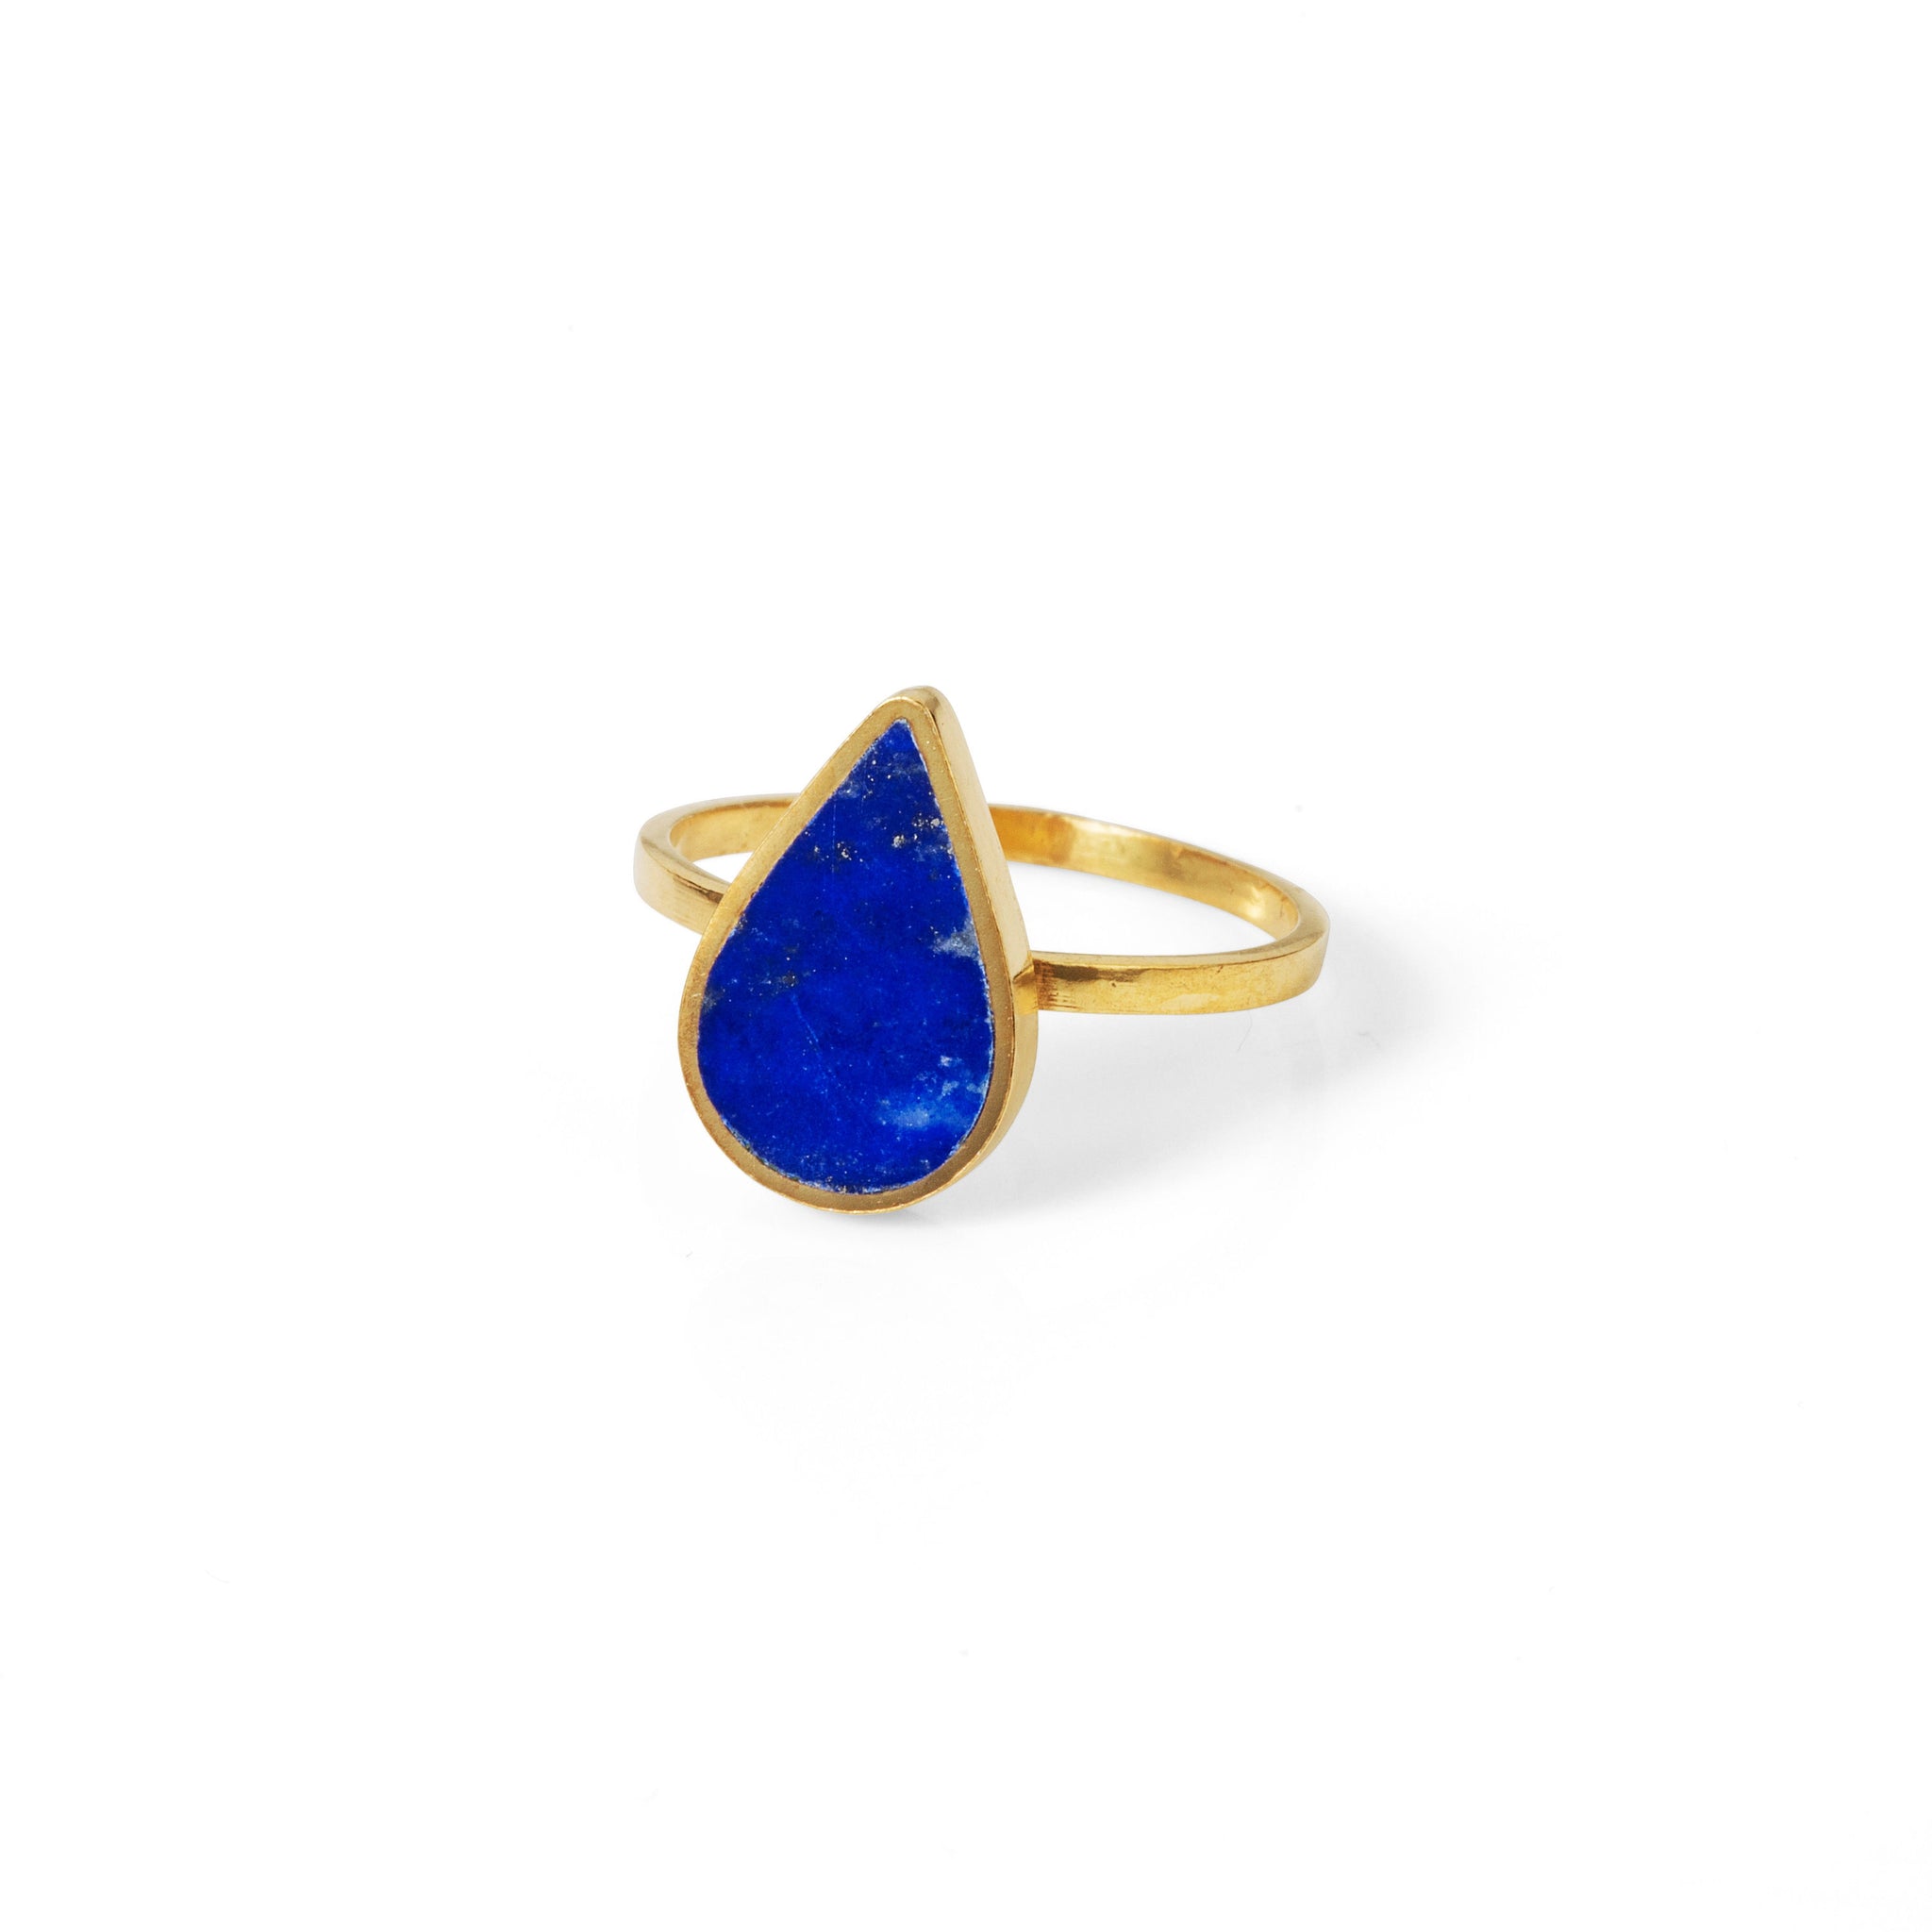 Handmade Afghan Ring Blue Gemstone Lapis Lazuli Drop Gold Elegant Inspired Jewelry Boho Chic Accessories Gift for Her